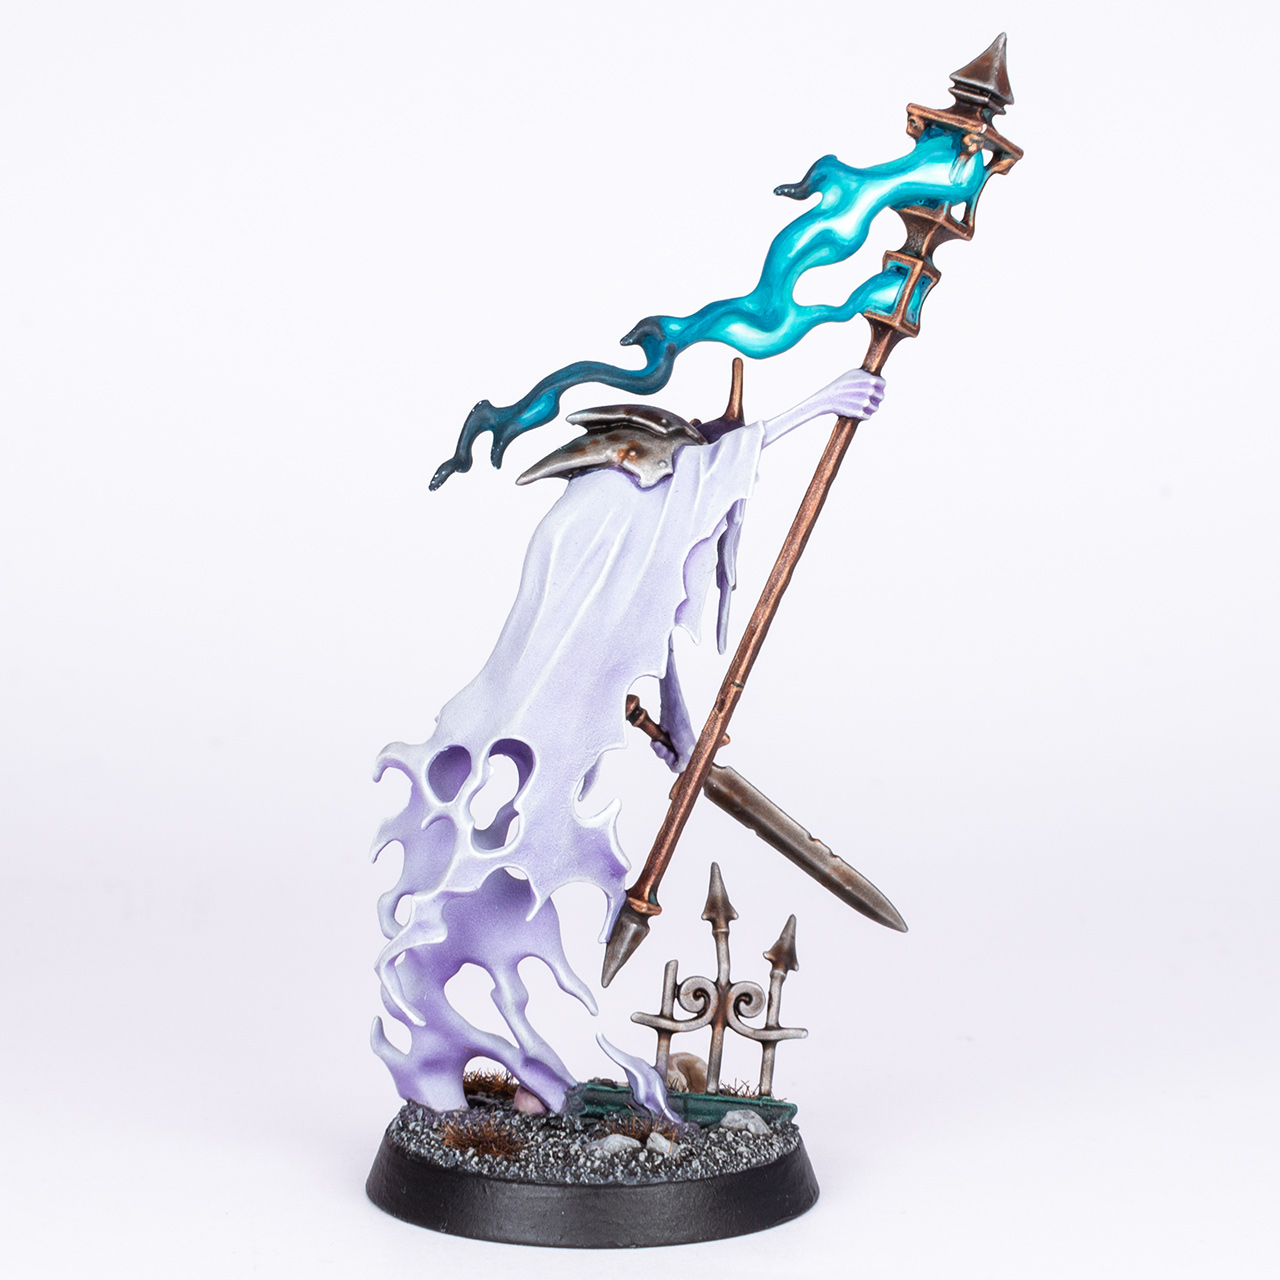 Back view of Nighthaunt Guardian of Souls painted by Stahly